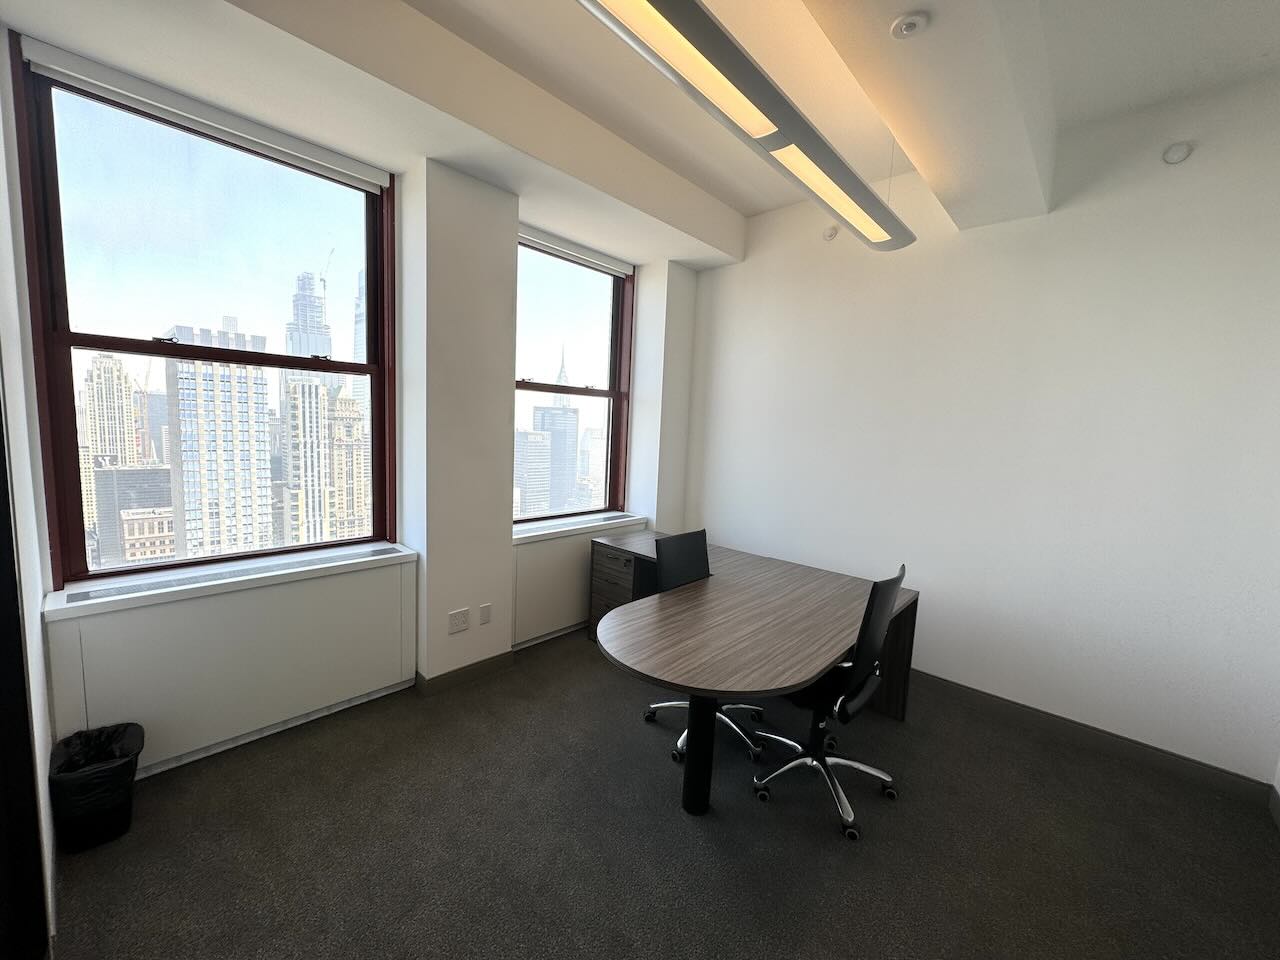 350 5th Avenue Office Space - Large Windows